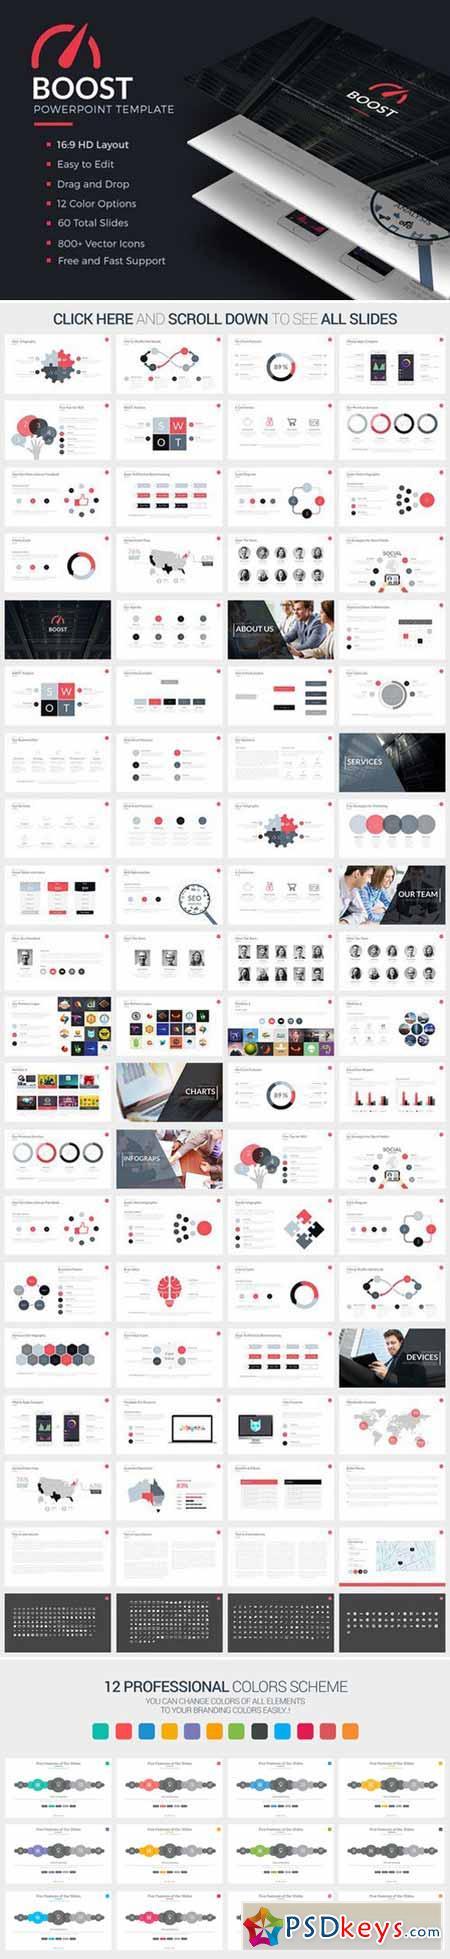 Boost Powerpoint Template 396546